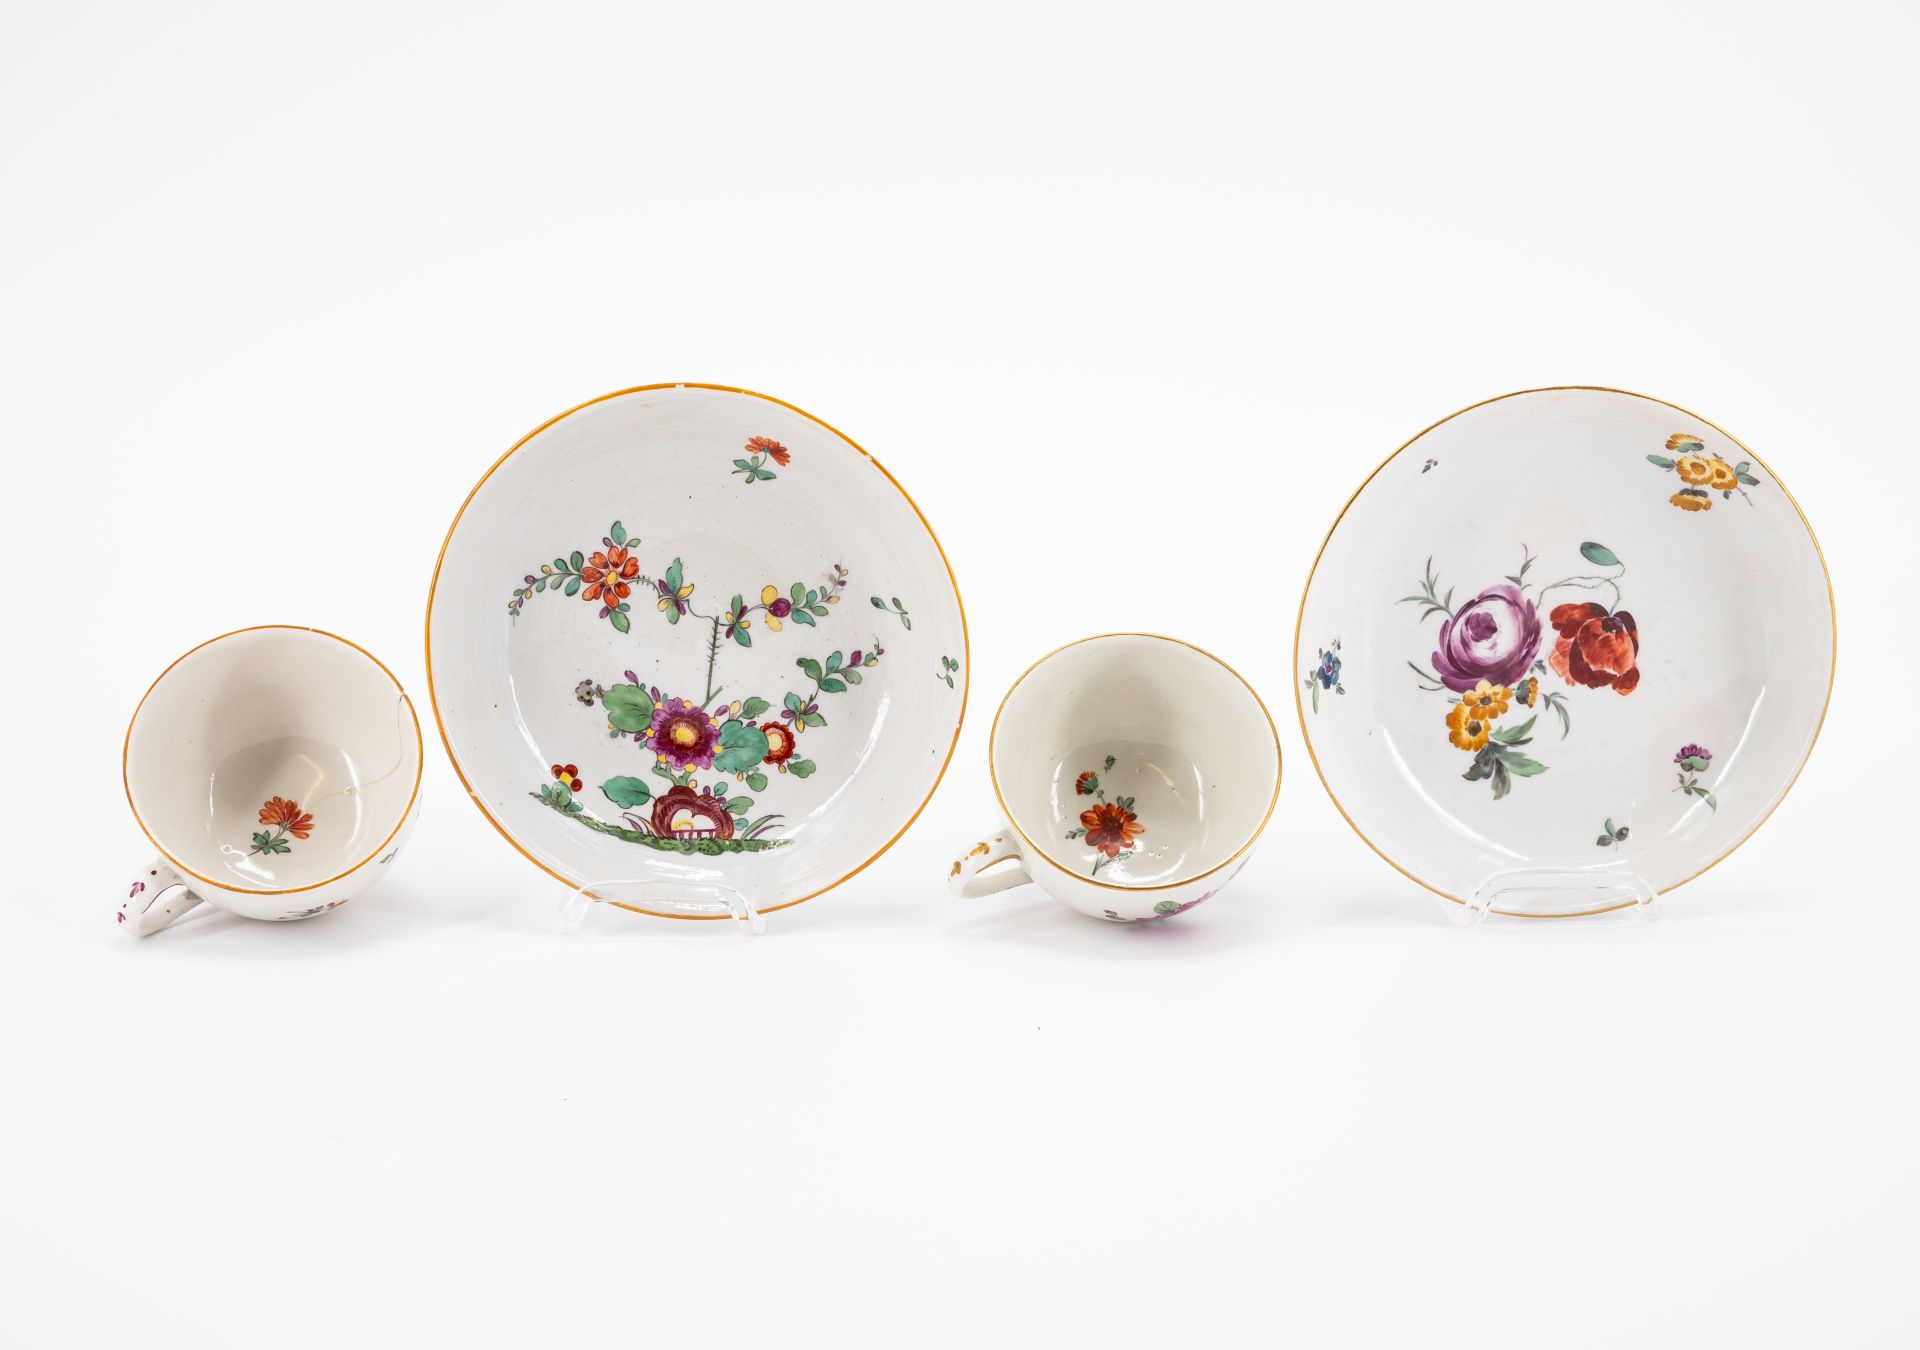 SIX PORCELAIN CUPS AND THREE SAUCERS WITH BIRD DECOR, FLOWERS AND LANDSCAPE SCENES - Image 10 of 16